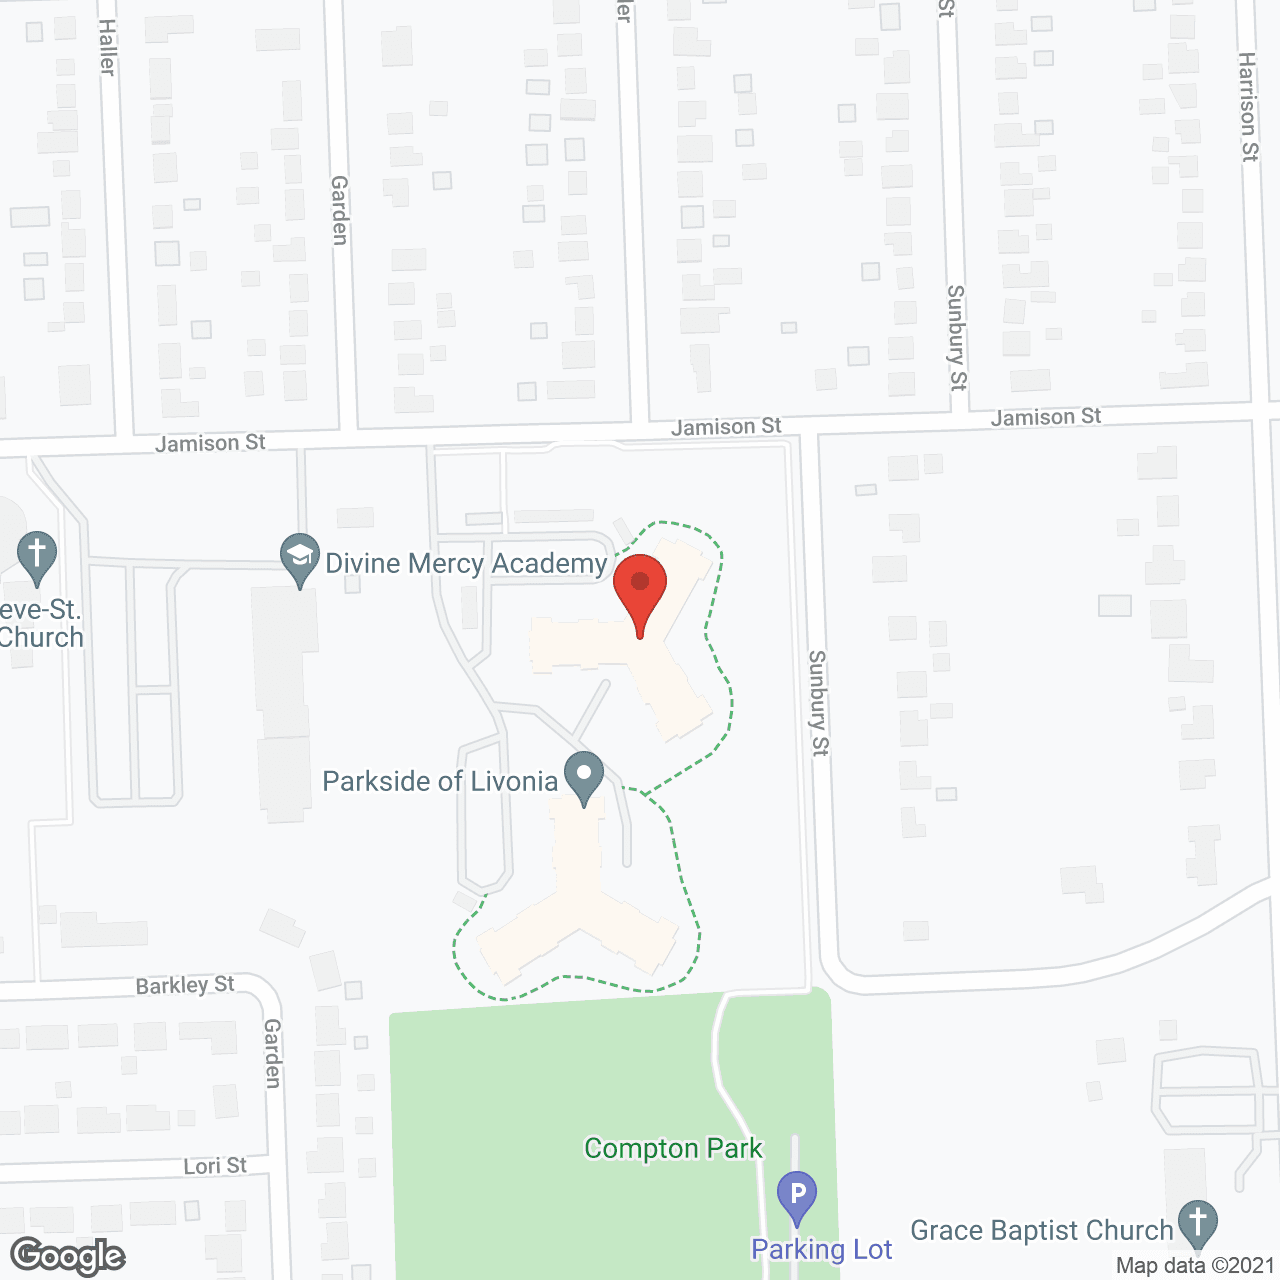 Parkside of Livonia in google map